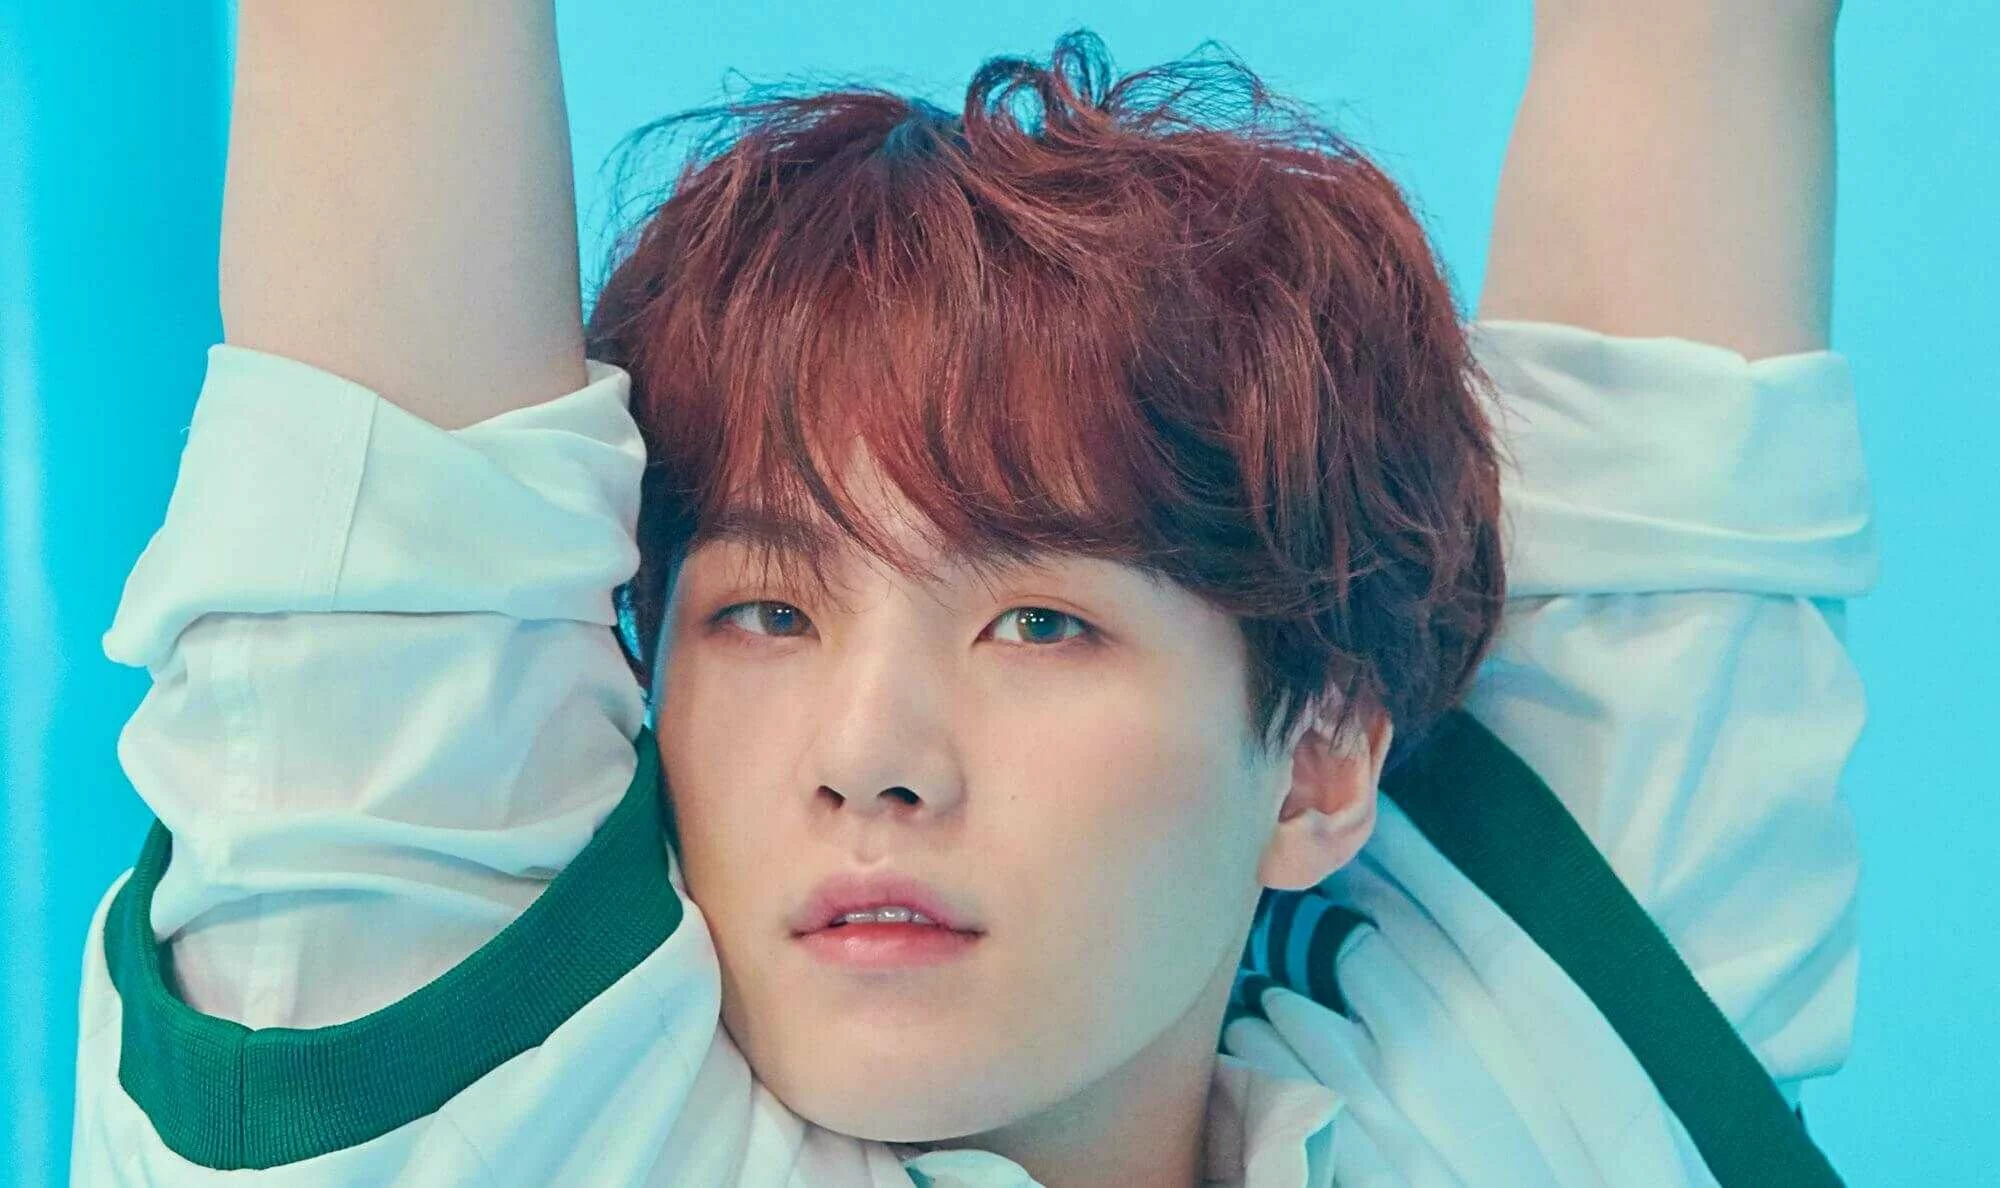 Teaser Image Of Suga From BTS' Collab With Singer IU Has The BTS Army Freaking Out